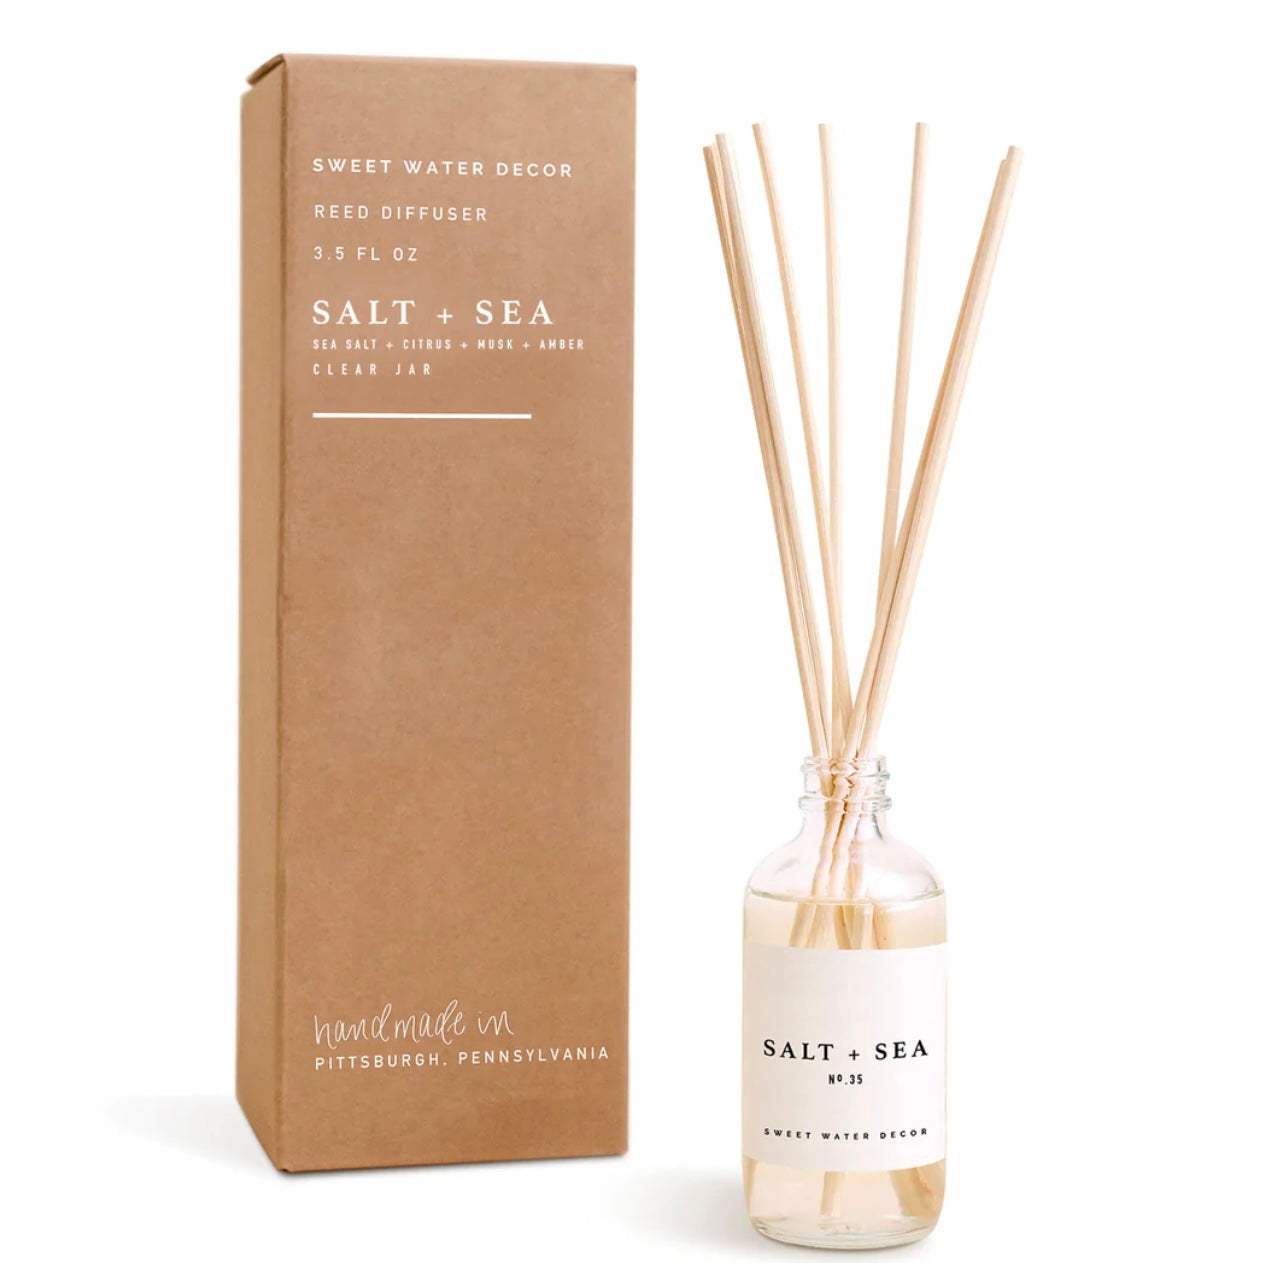 SEA AND SALT REED DIFFUSER